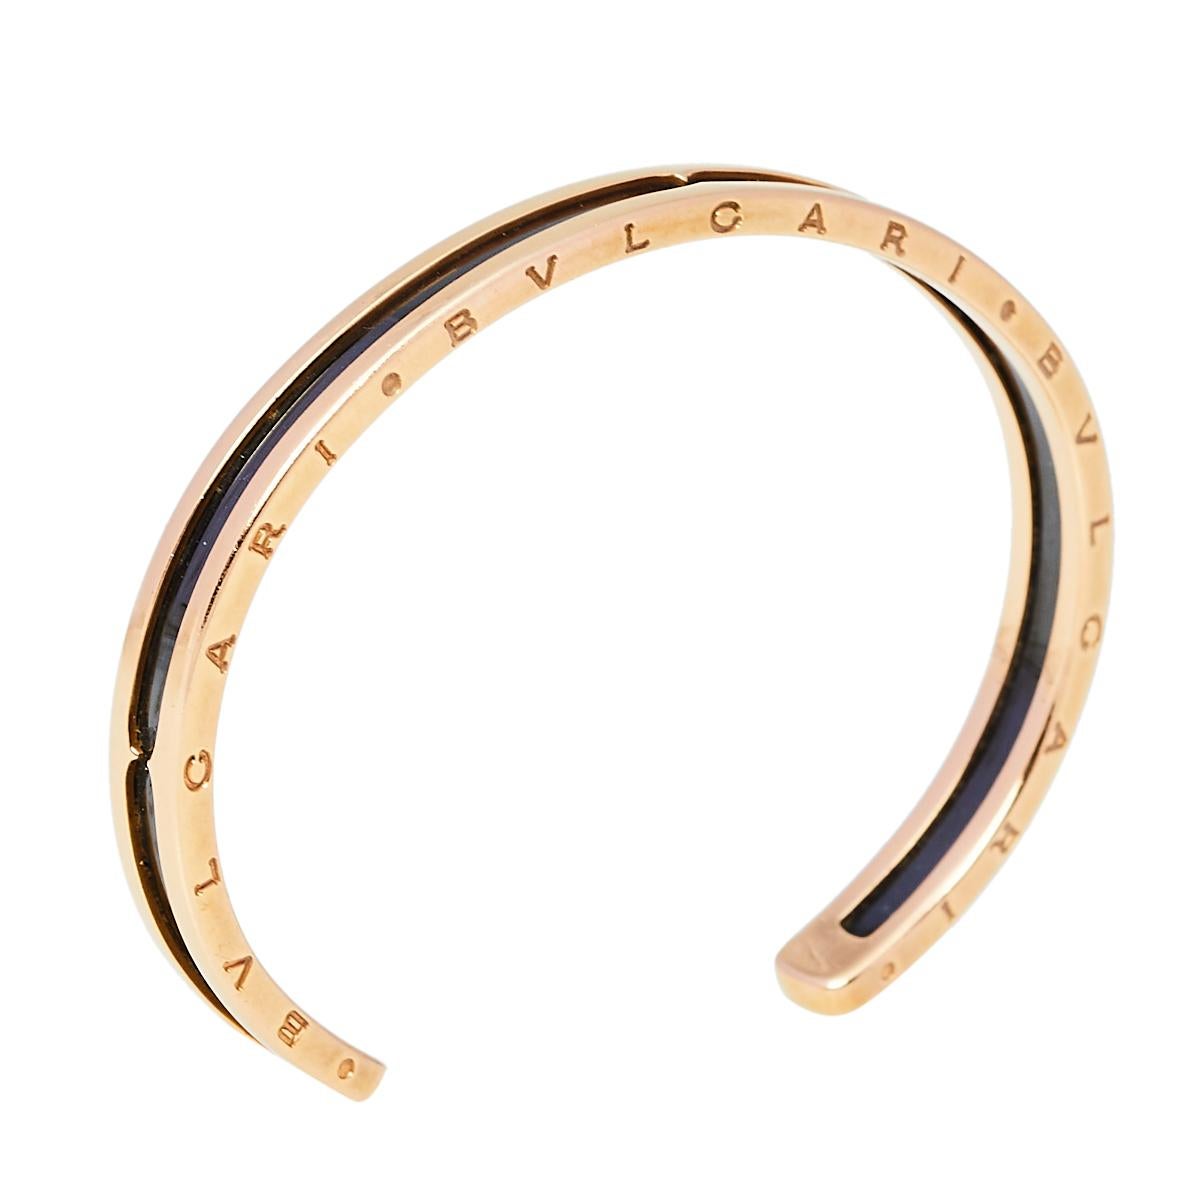 Adorn your wrist with this gem of a bracelet from Bvlgari. The piece is from their B.Zero1 collection and has been crafted from 18k rose gold and beautifully lined with carbon-coated steel. It is complete with the brand's lettering on the contours.